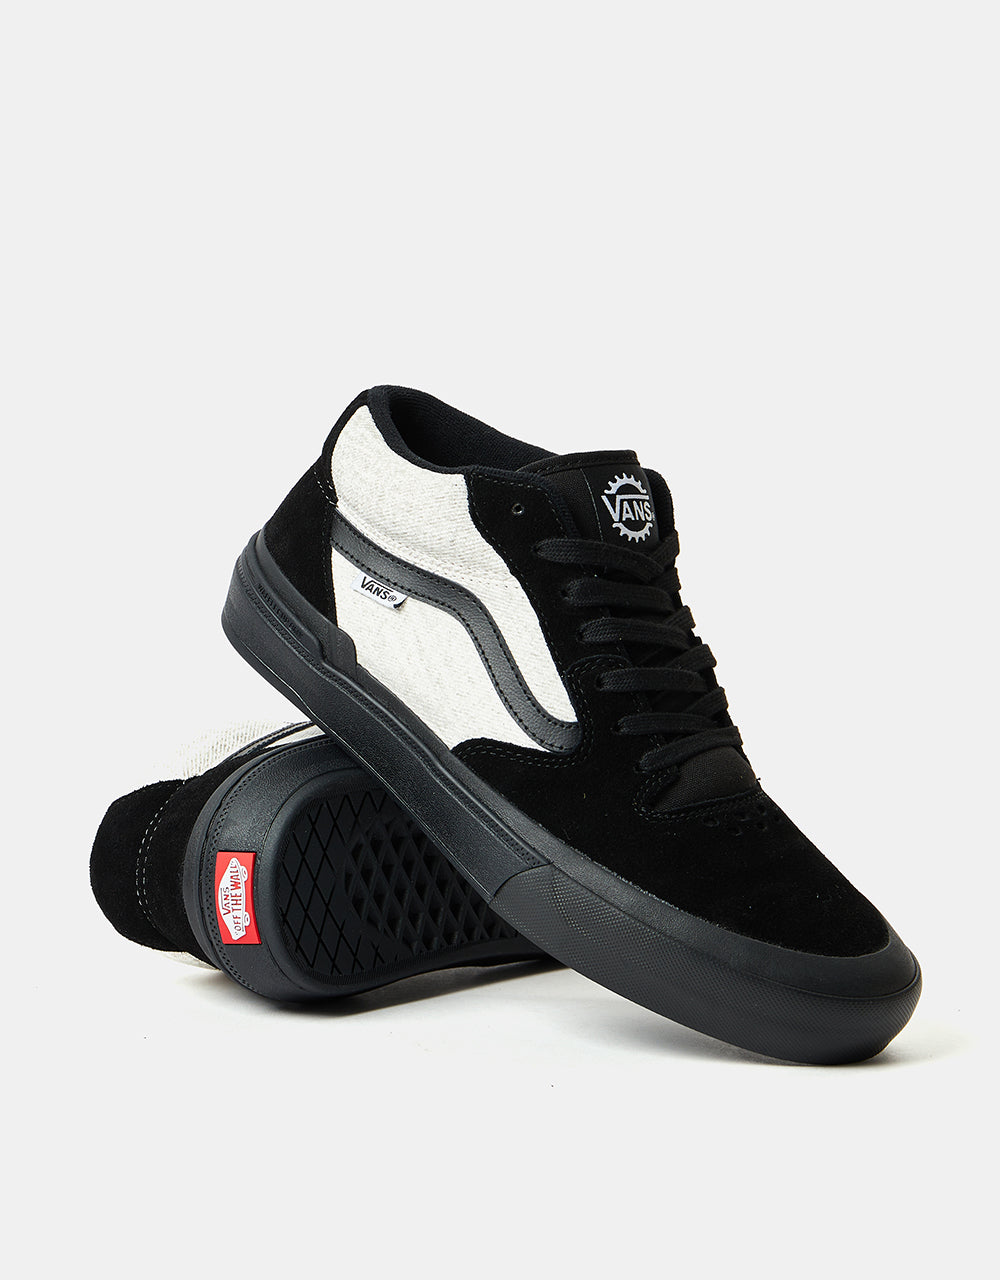 Vans BMX Style 114 Shoes - (Fast and Loose) Black